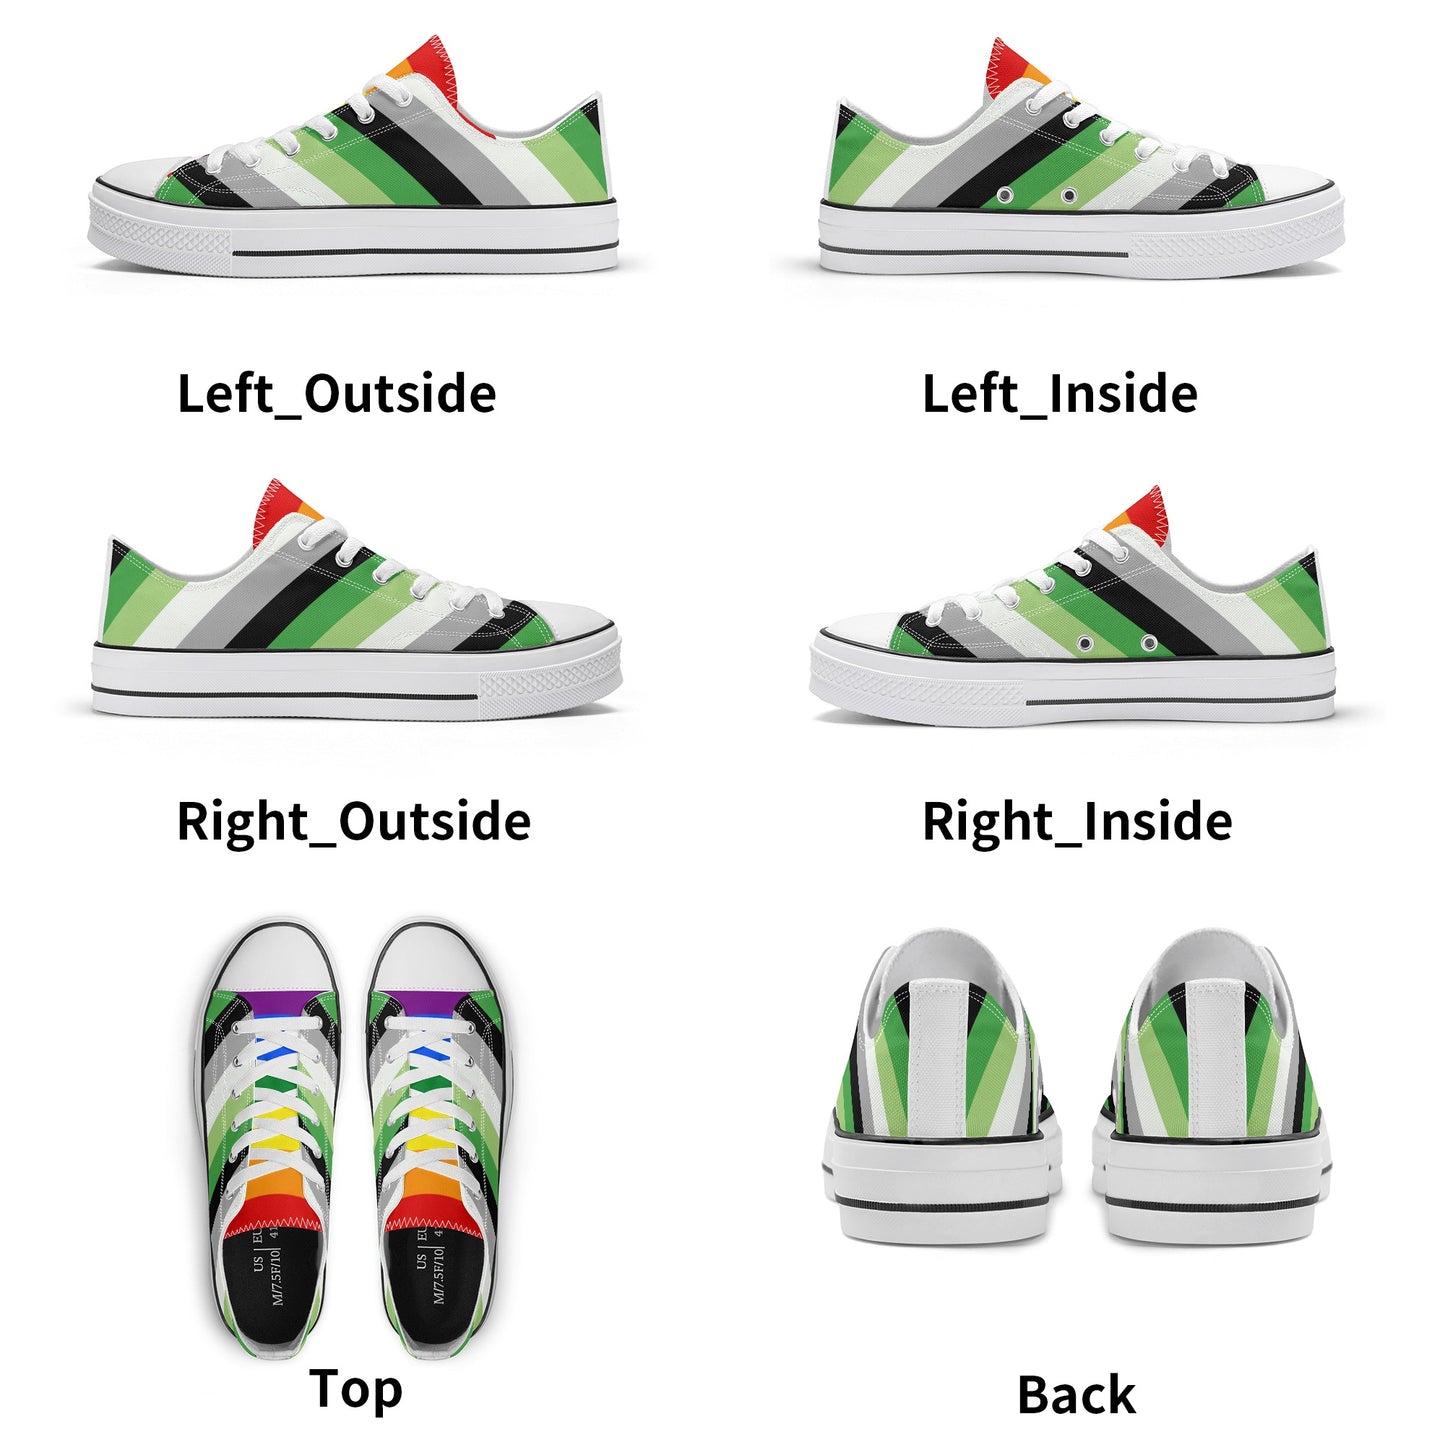 Aromantic Pride Collection - Womens Classic Low Top Canvas Shoes for the LGBTQIA+ community